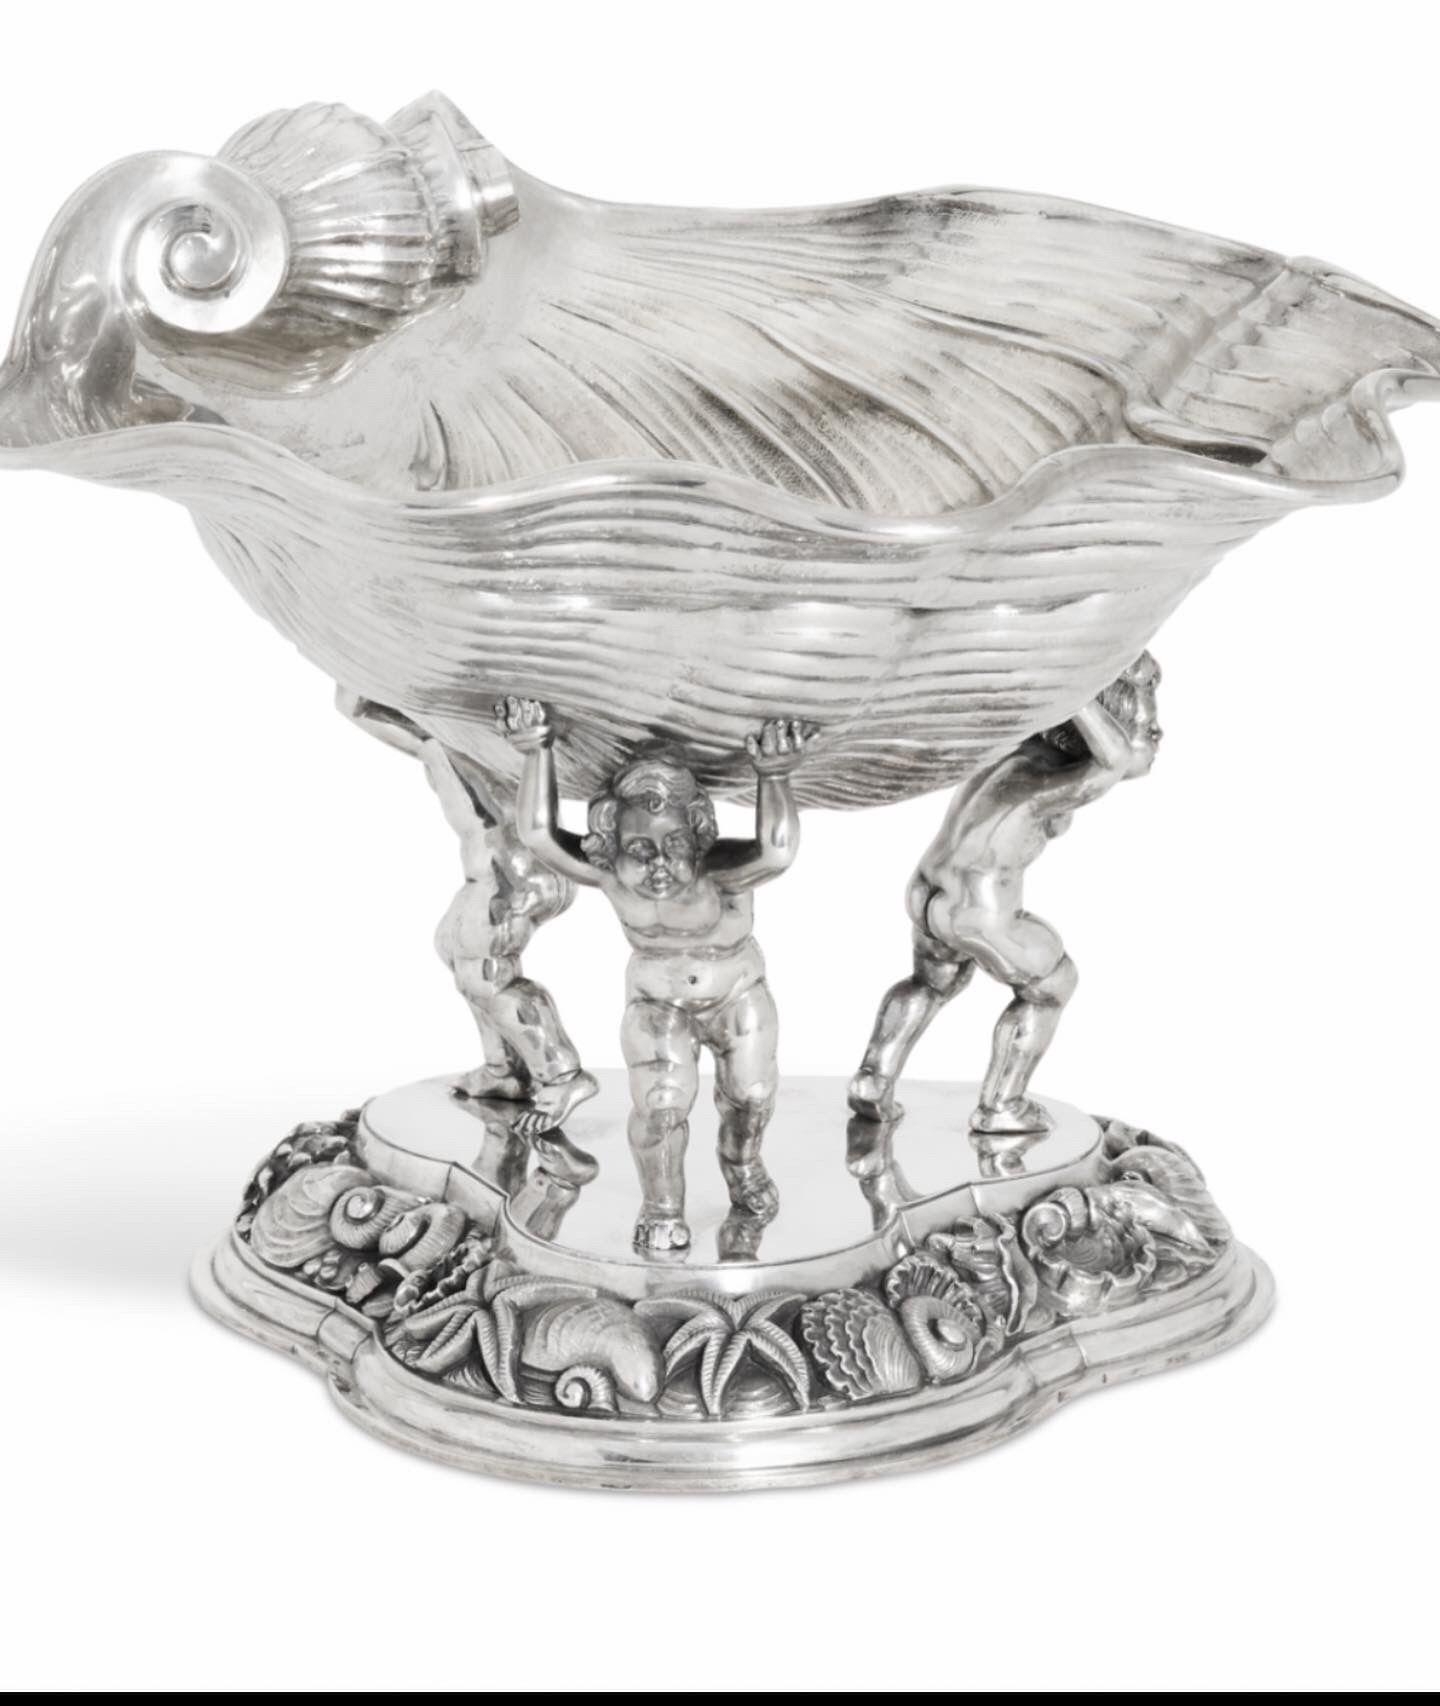 An Italian 20th century large solid silver bowl c1940. Weight 3165 grams heavy 26cm height 24cm